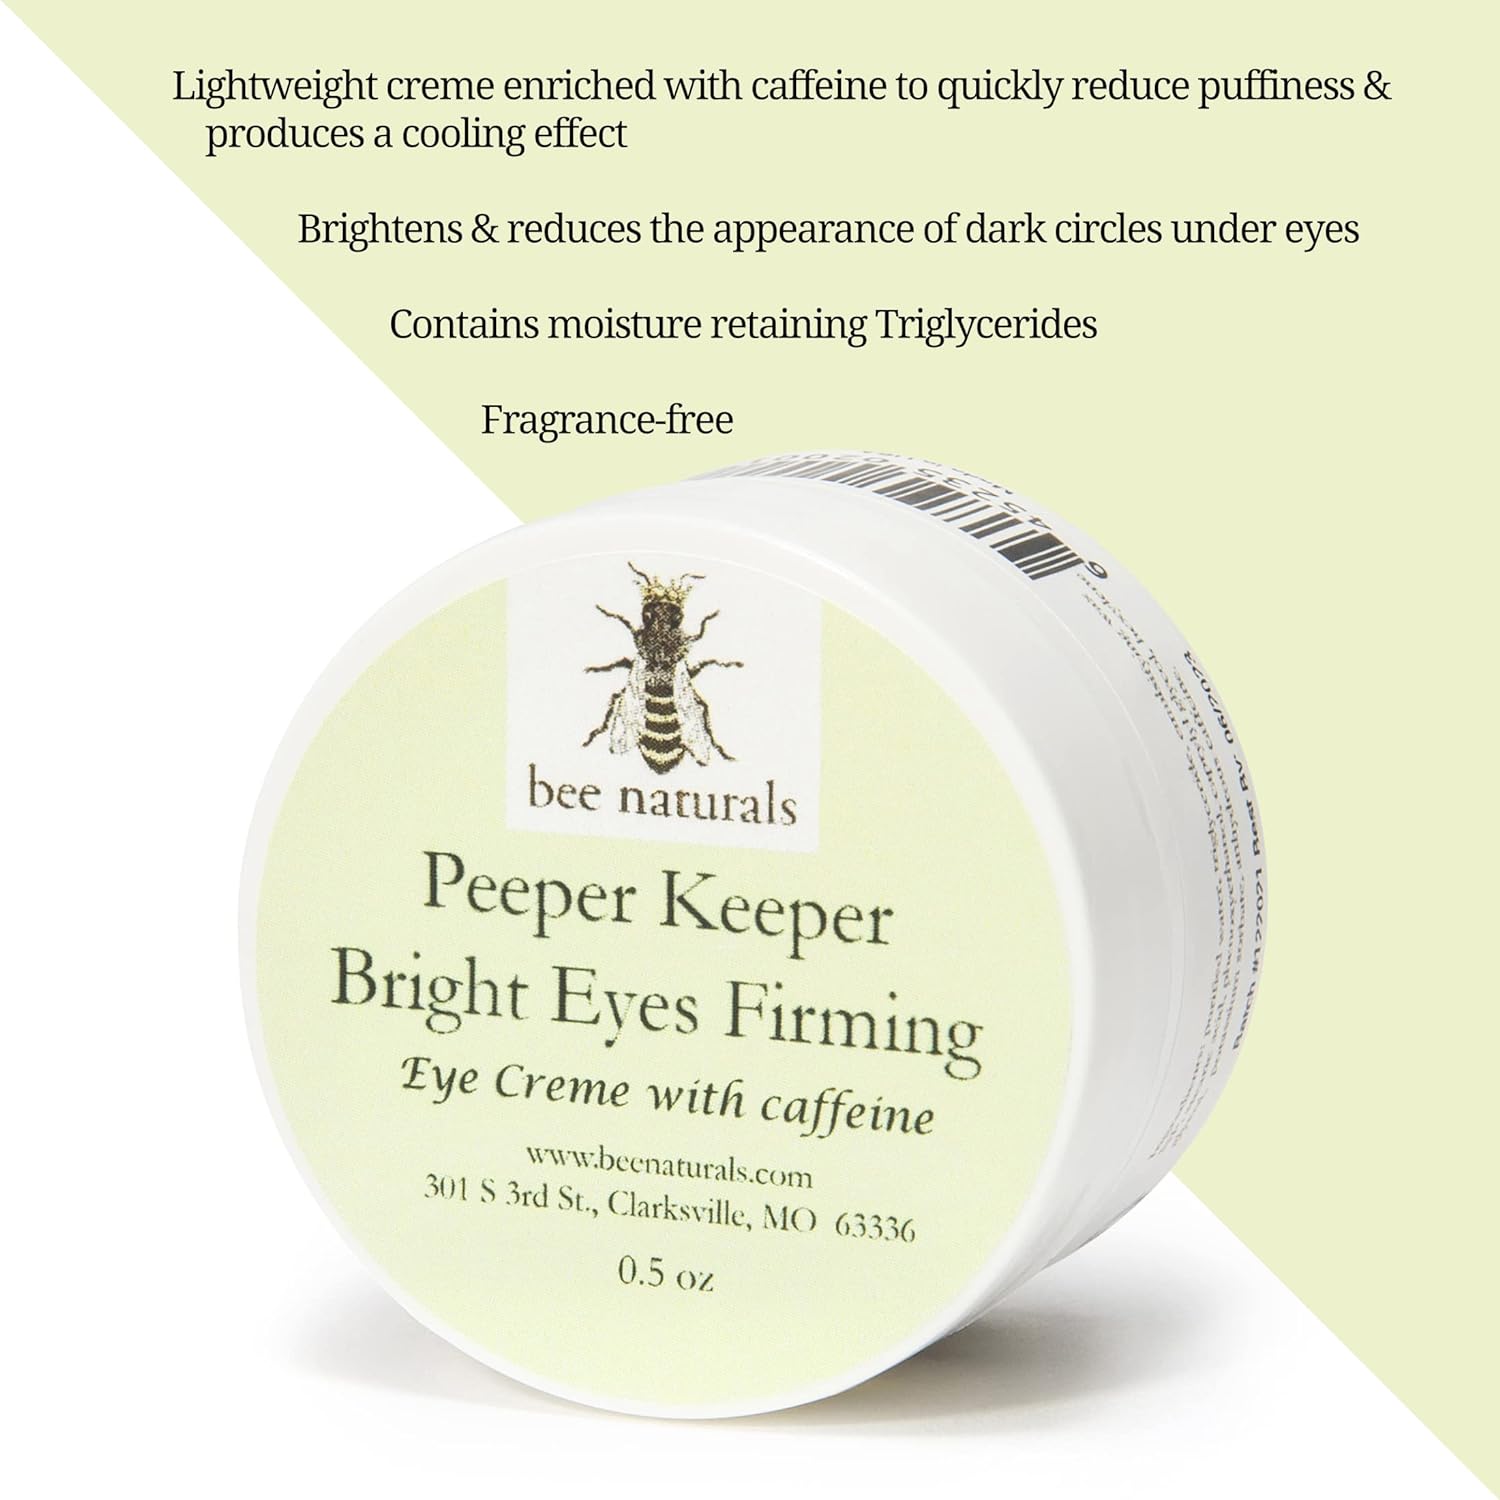 Bee Naturals Peeper Keeper Bright Eyes Firming Crème - Caffeine Enriched for Puffy Eye Reduction - Gentle Daily Use After Cleansing - Caution for Caffeine Sensitivity : Home & Kitchen